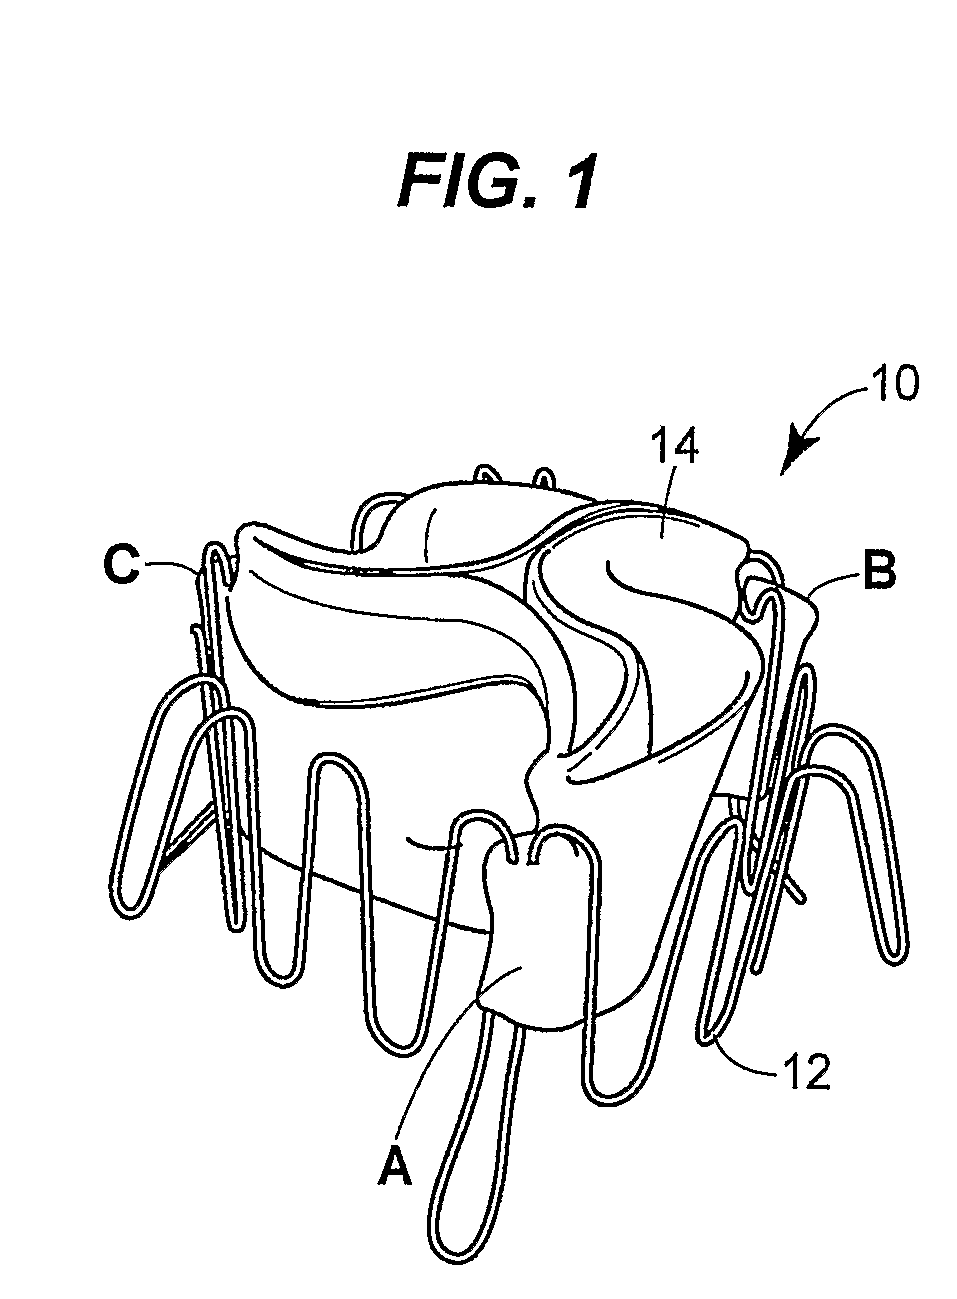 Collapsible Heart Valve with Polymer Leaflets